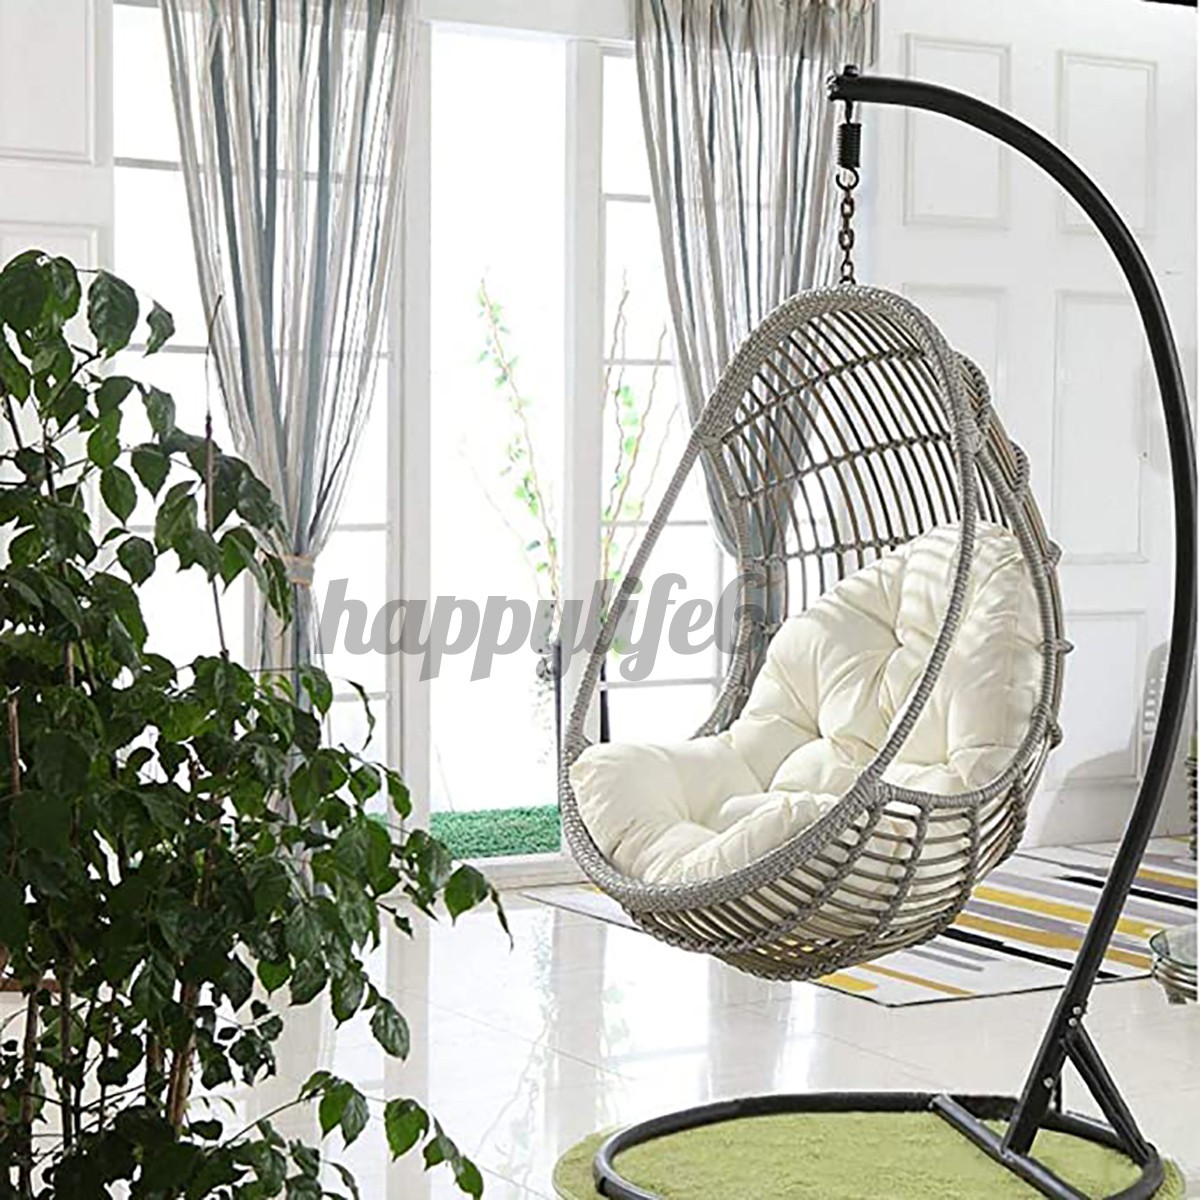 Round Hanging Egg Hammock Chair Cushion Swing Seat Cushion Thick Nest Hanging Chair Back For Indoor Outdoor Patio Happylife6 Shopee Indonesia